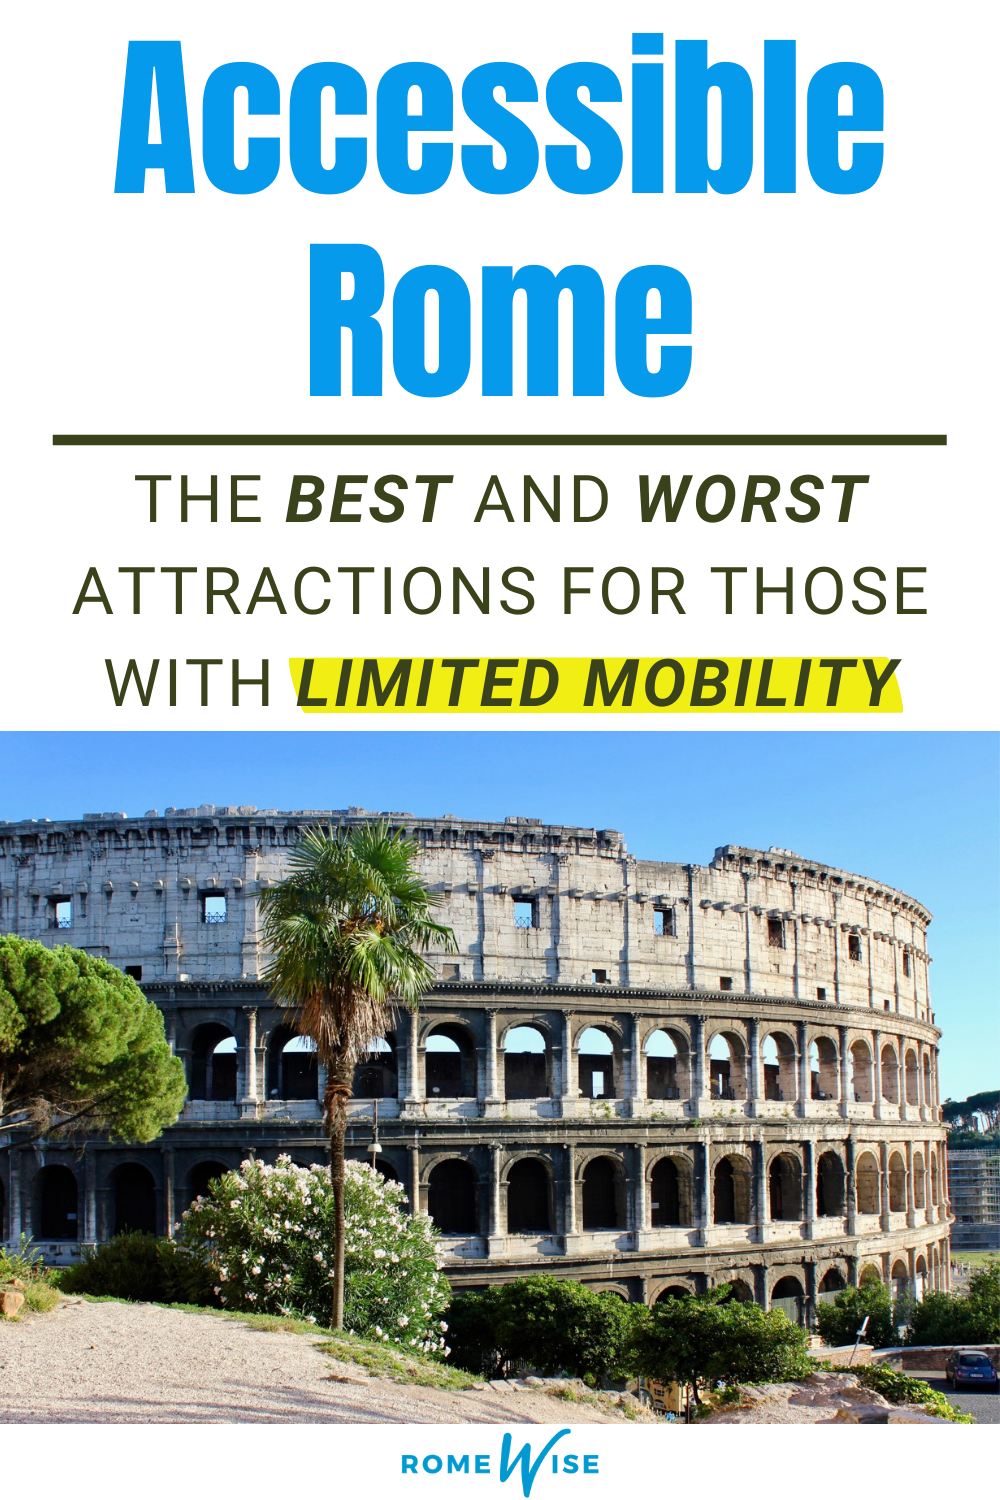 Rome accessible